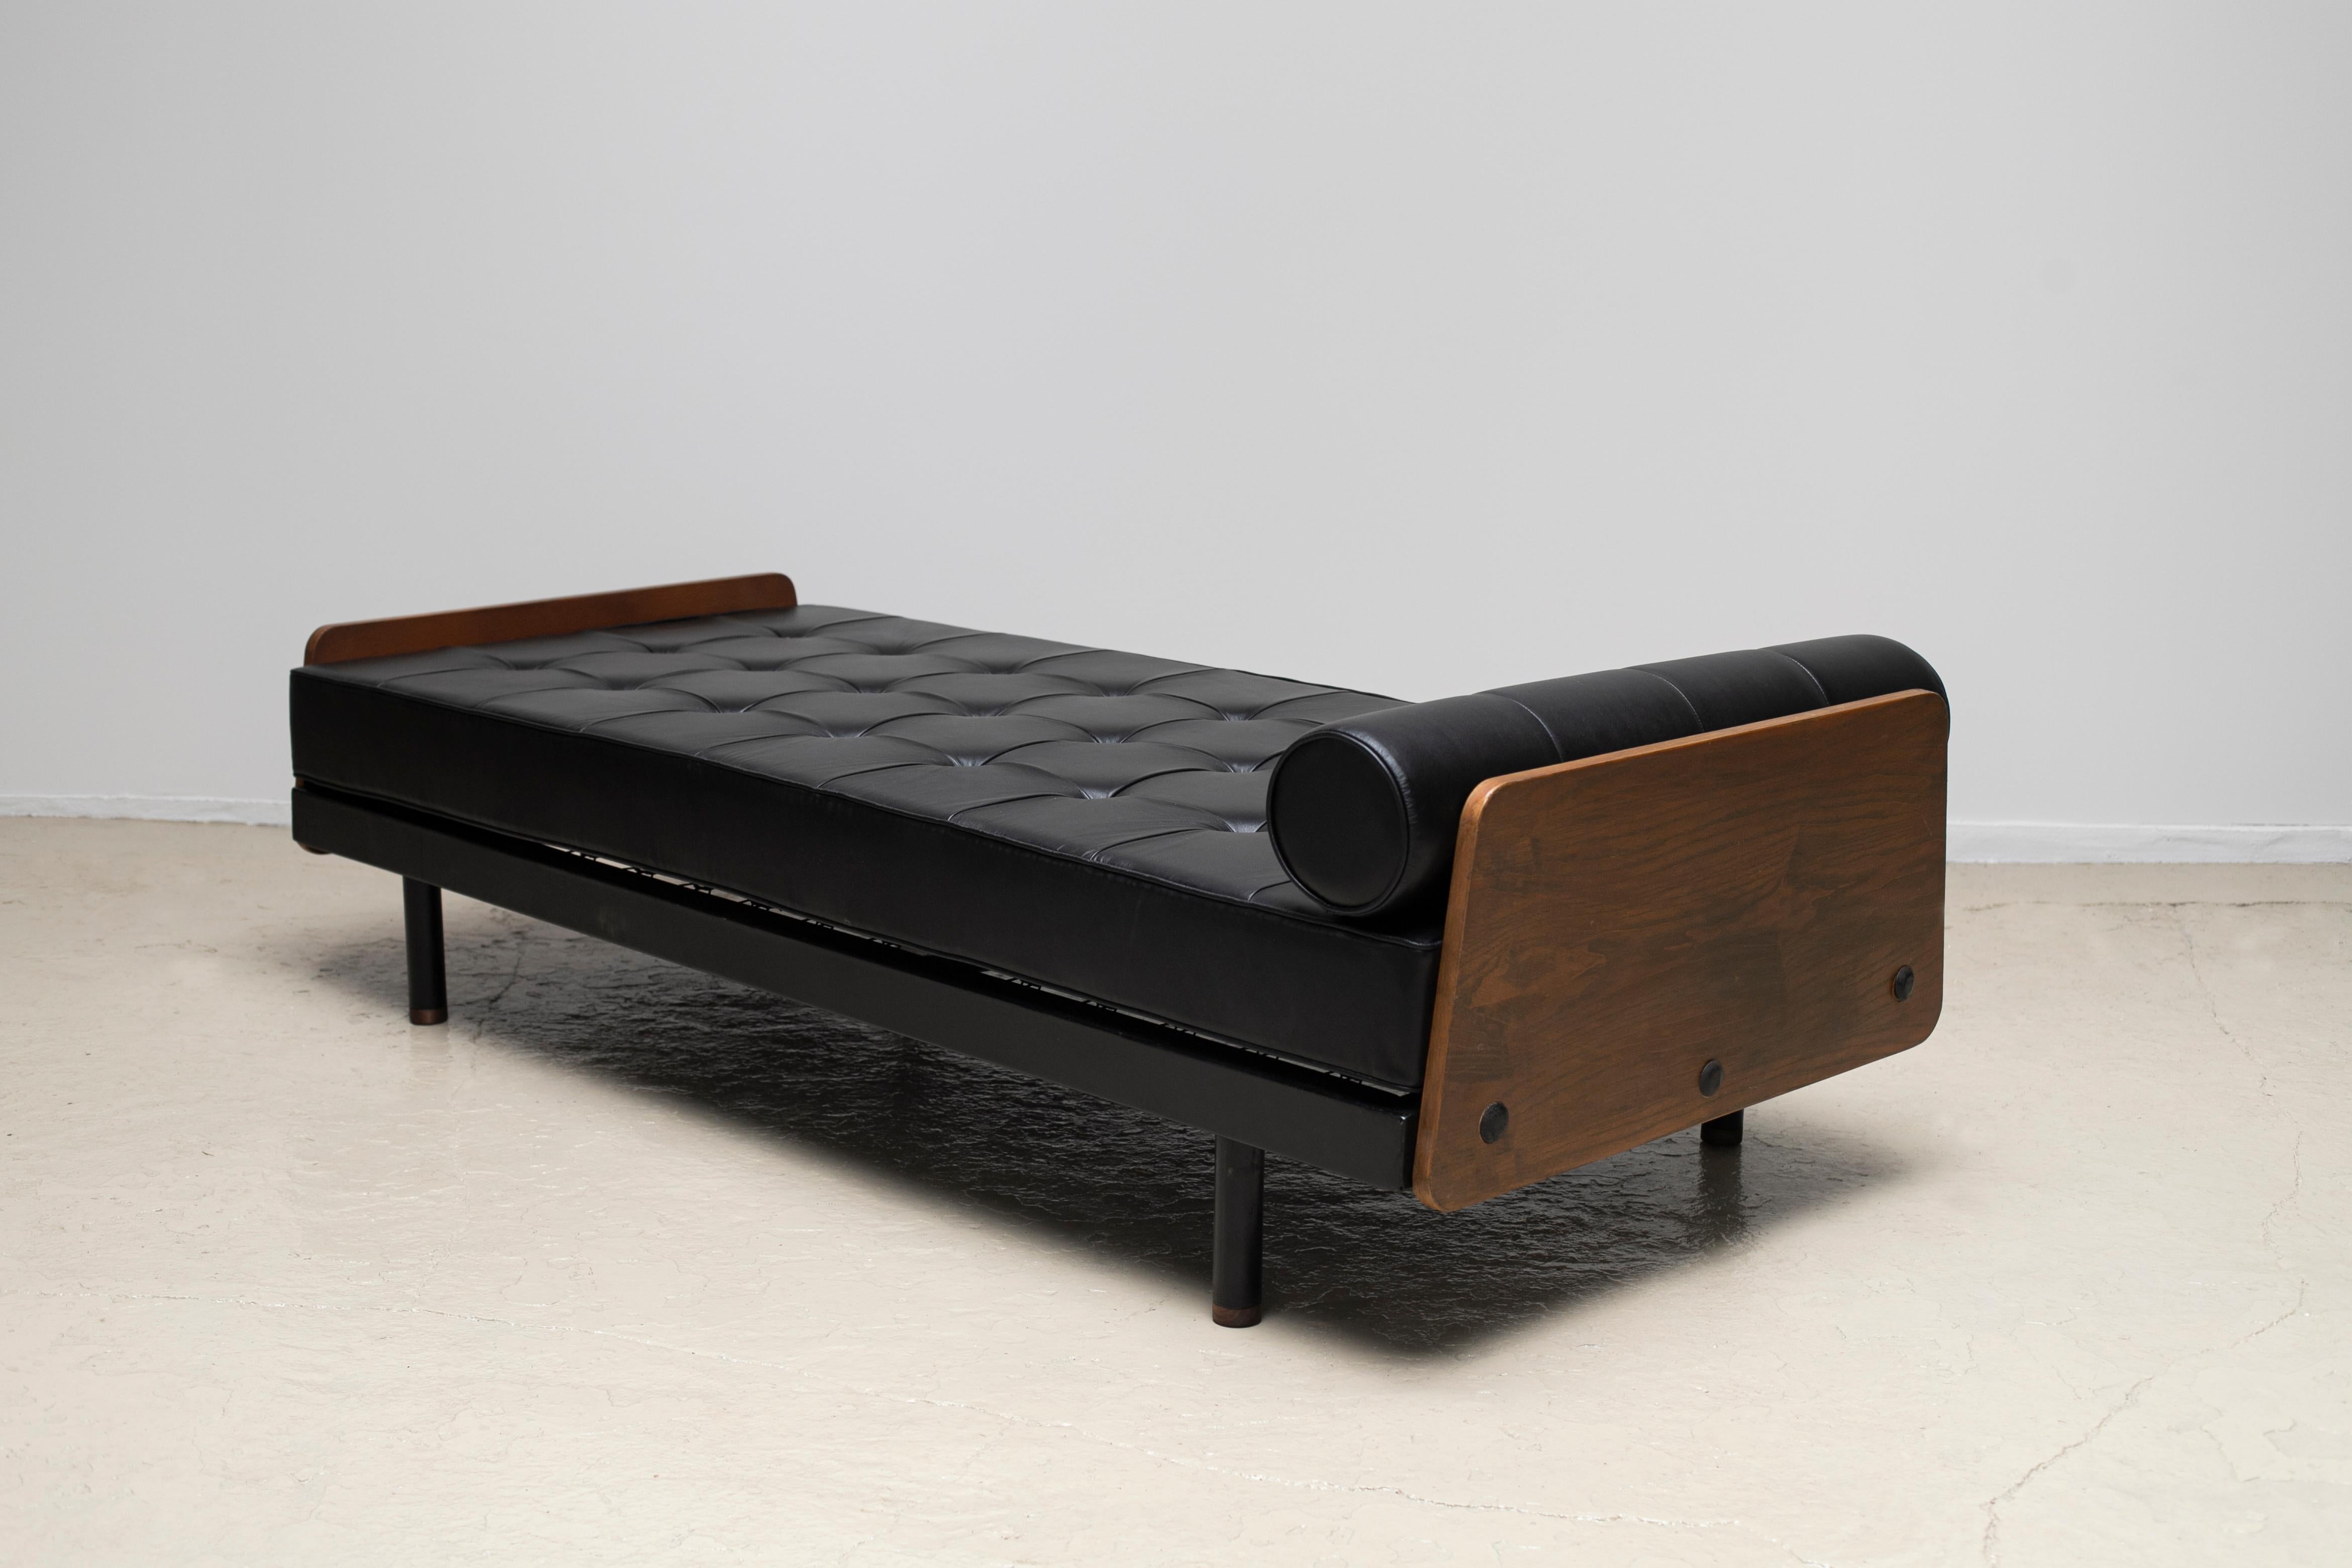 S.C.A.L daybed n°452 designed by Jean Prouvé in 1950s for Cansado in Mauritania.
Mahogany veneered end panels and lacquered steel.
The mattress and bolster are newly made with the genuine cow leather.
      